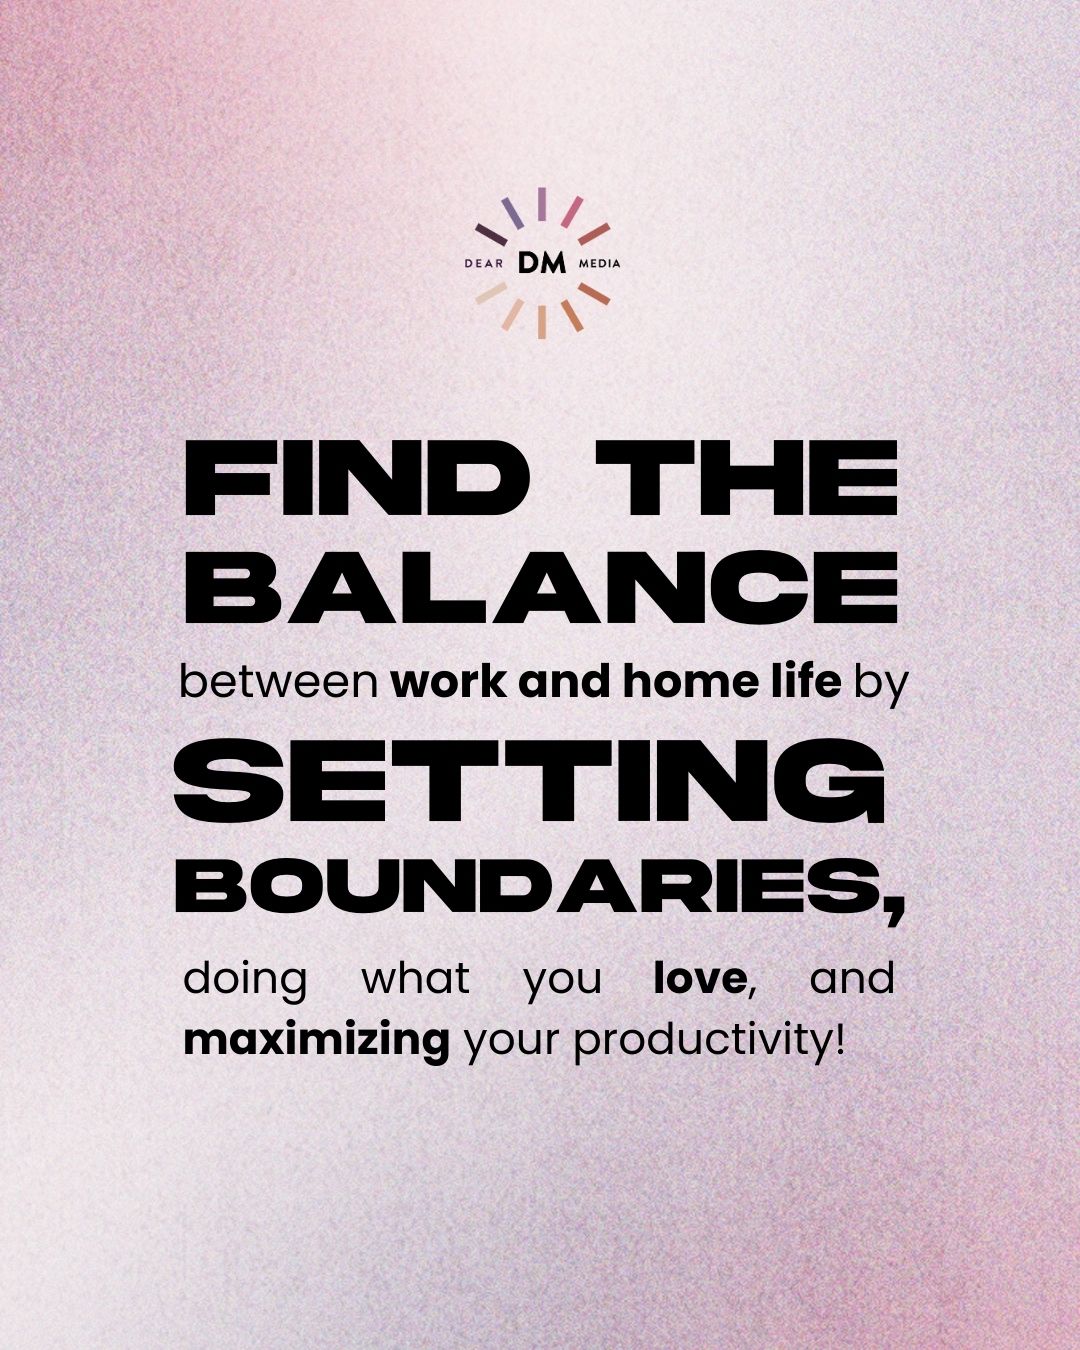 Find the balance between work and home life by setting boundaries, doing what you love, and maximizing your productivity in black bold over a pink background